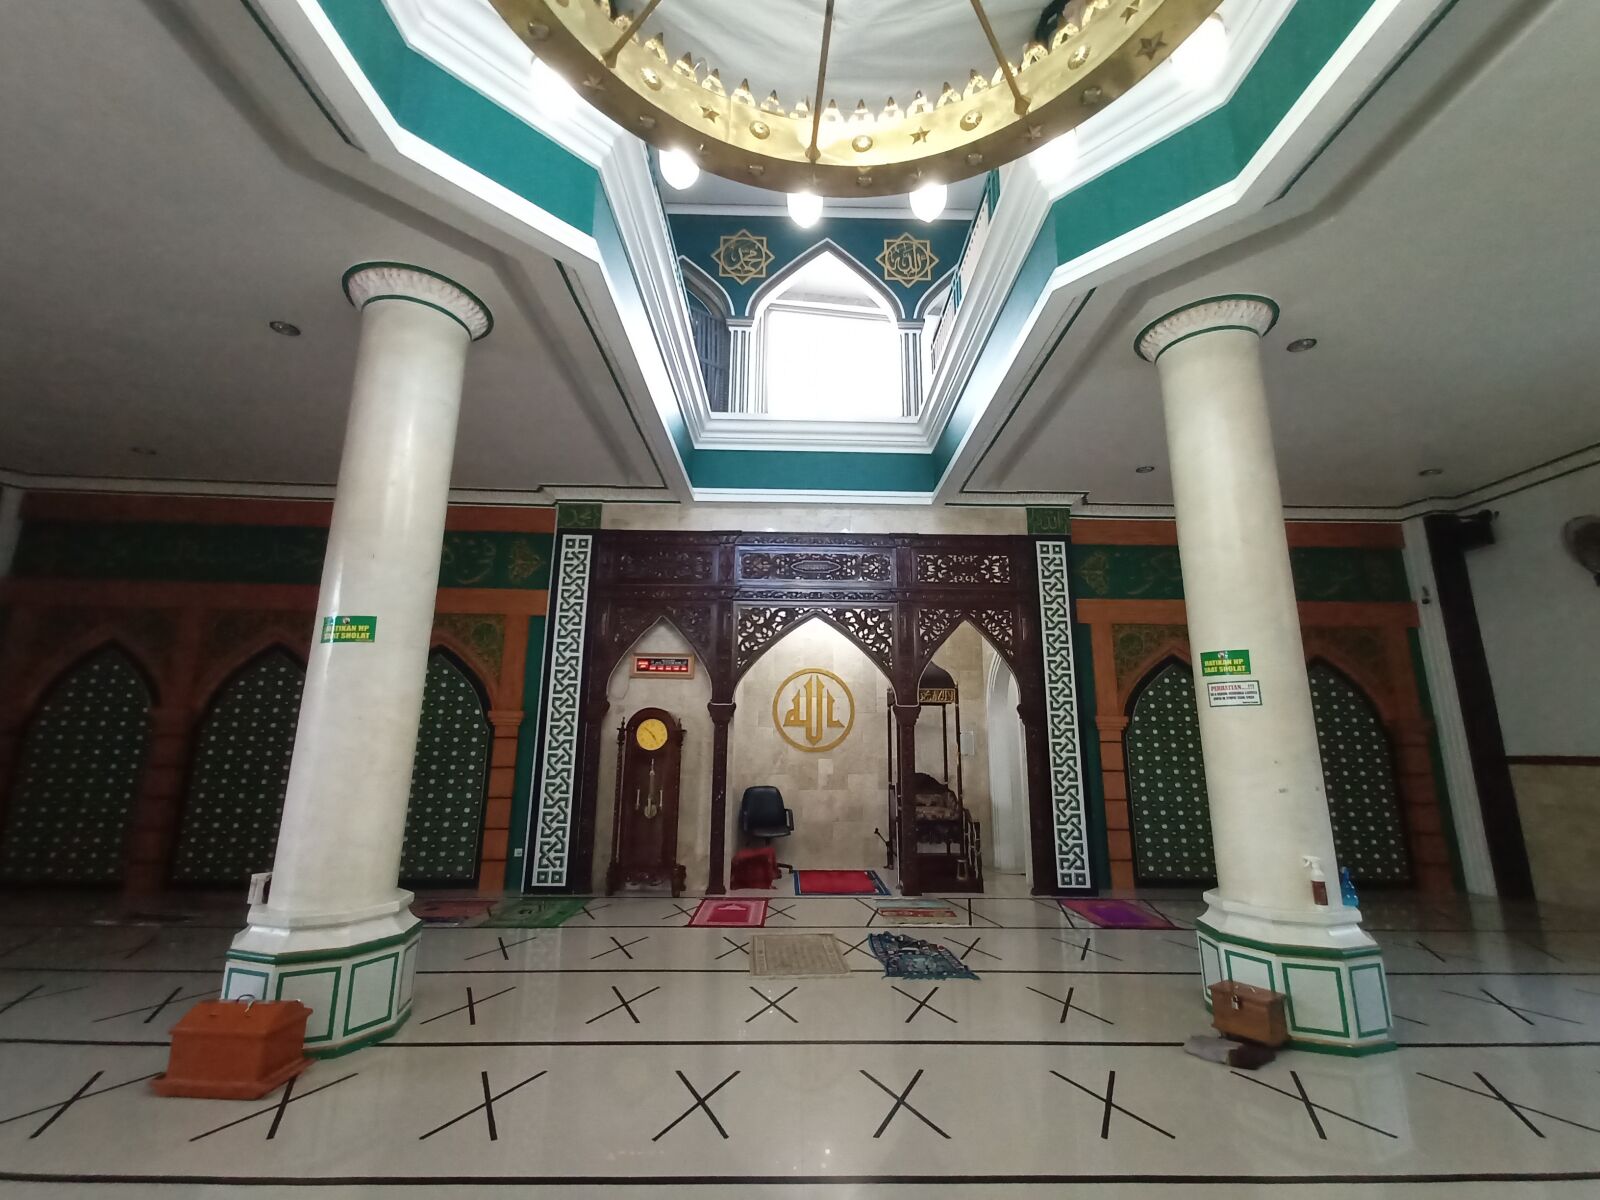 vivo 1819 sample photo. The mosque, mosque, muslim photography